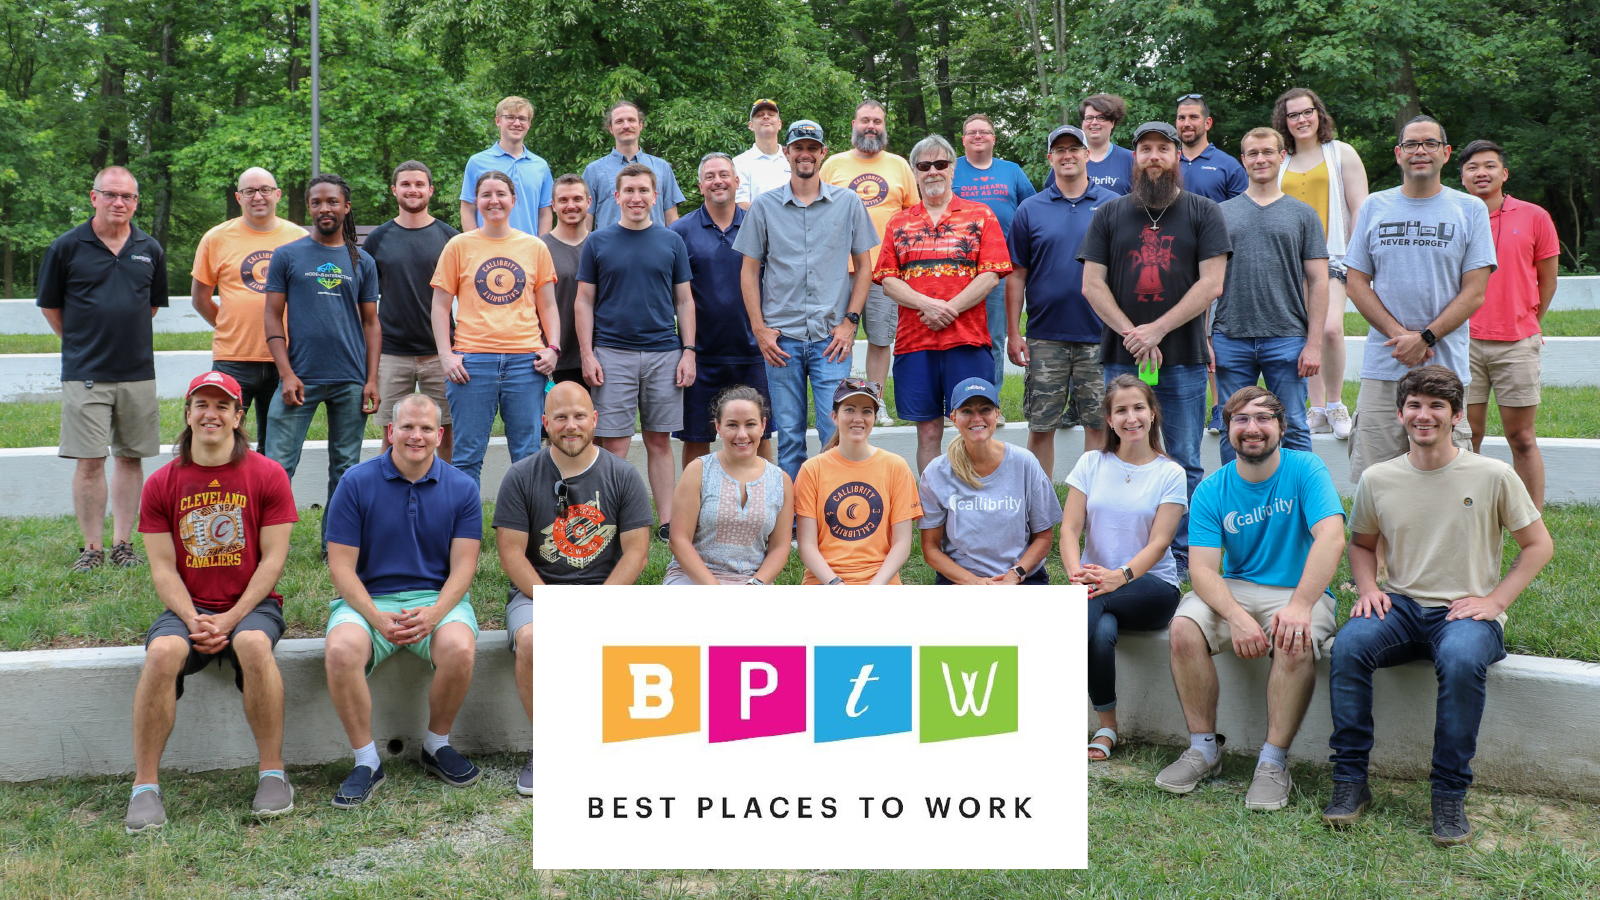 Our Team in 2021, a small company of under 40 people. The ‘Best Places to Work’ Logo is superimposed below the team.